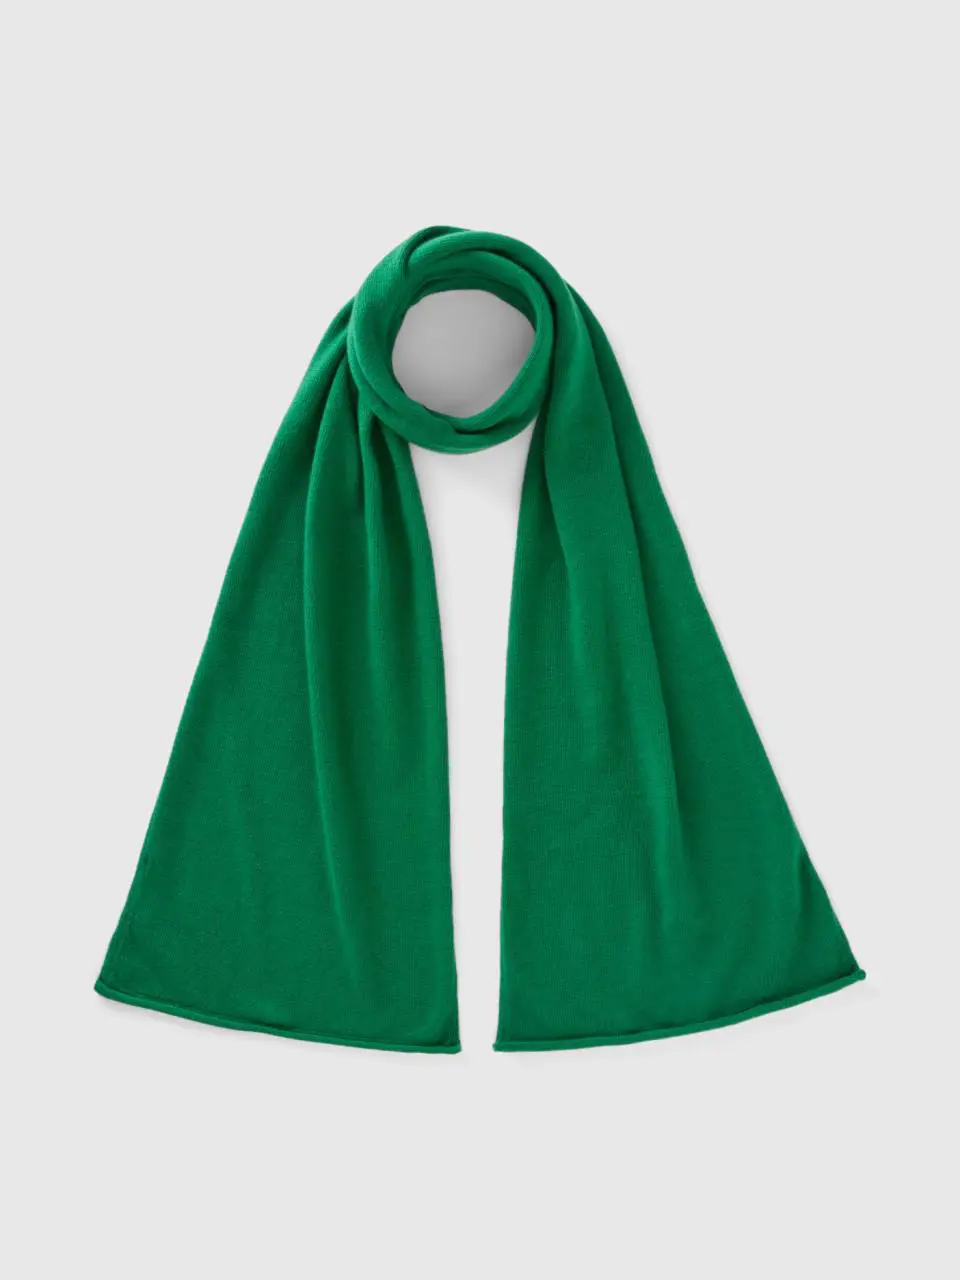 Benetton forest green cashmere blend scarf. 1